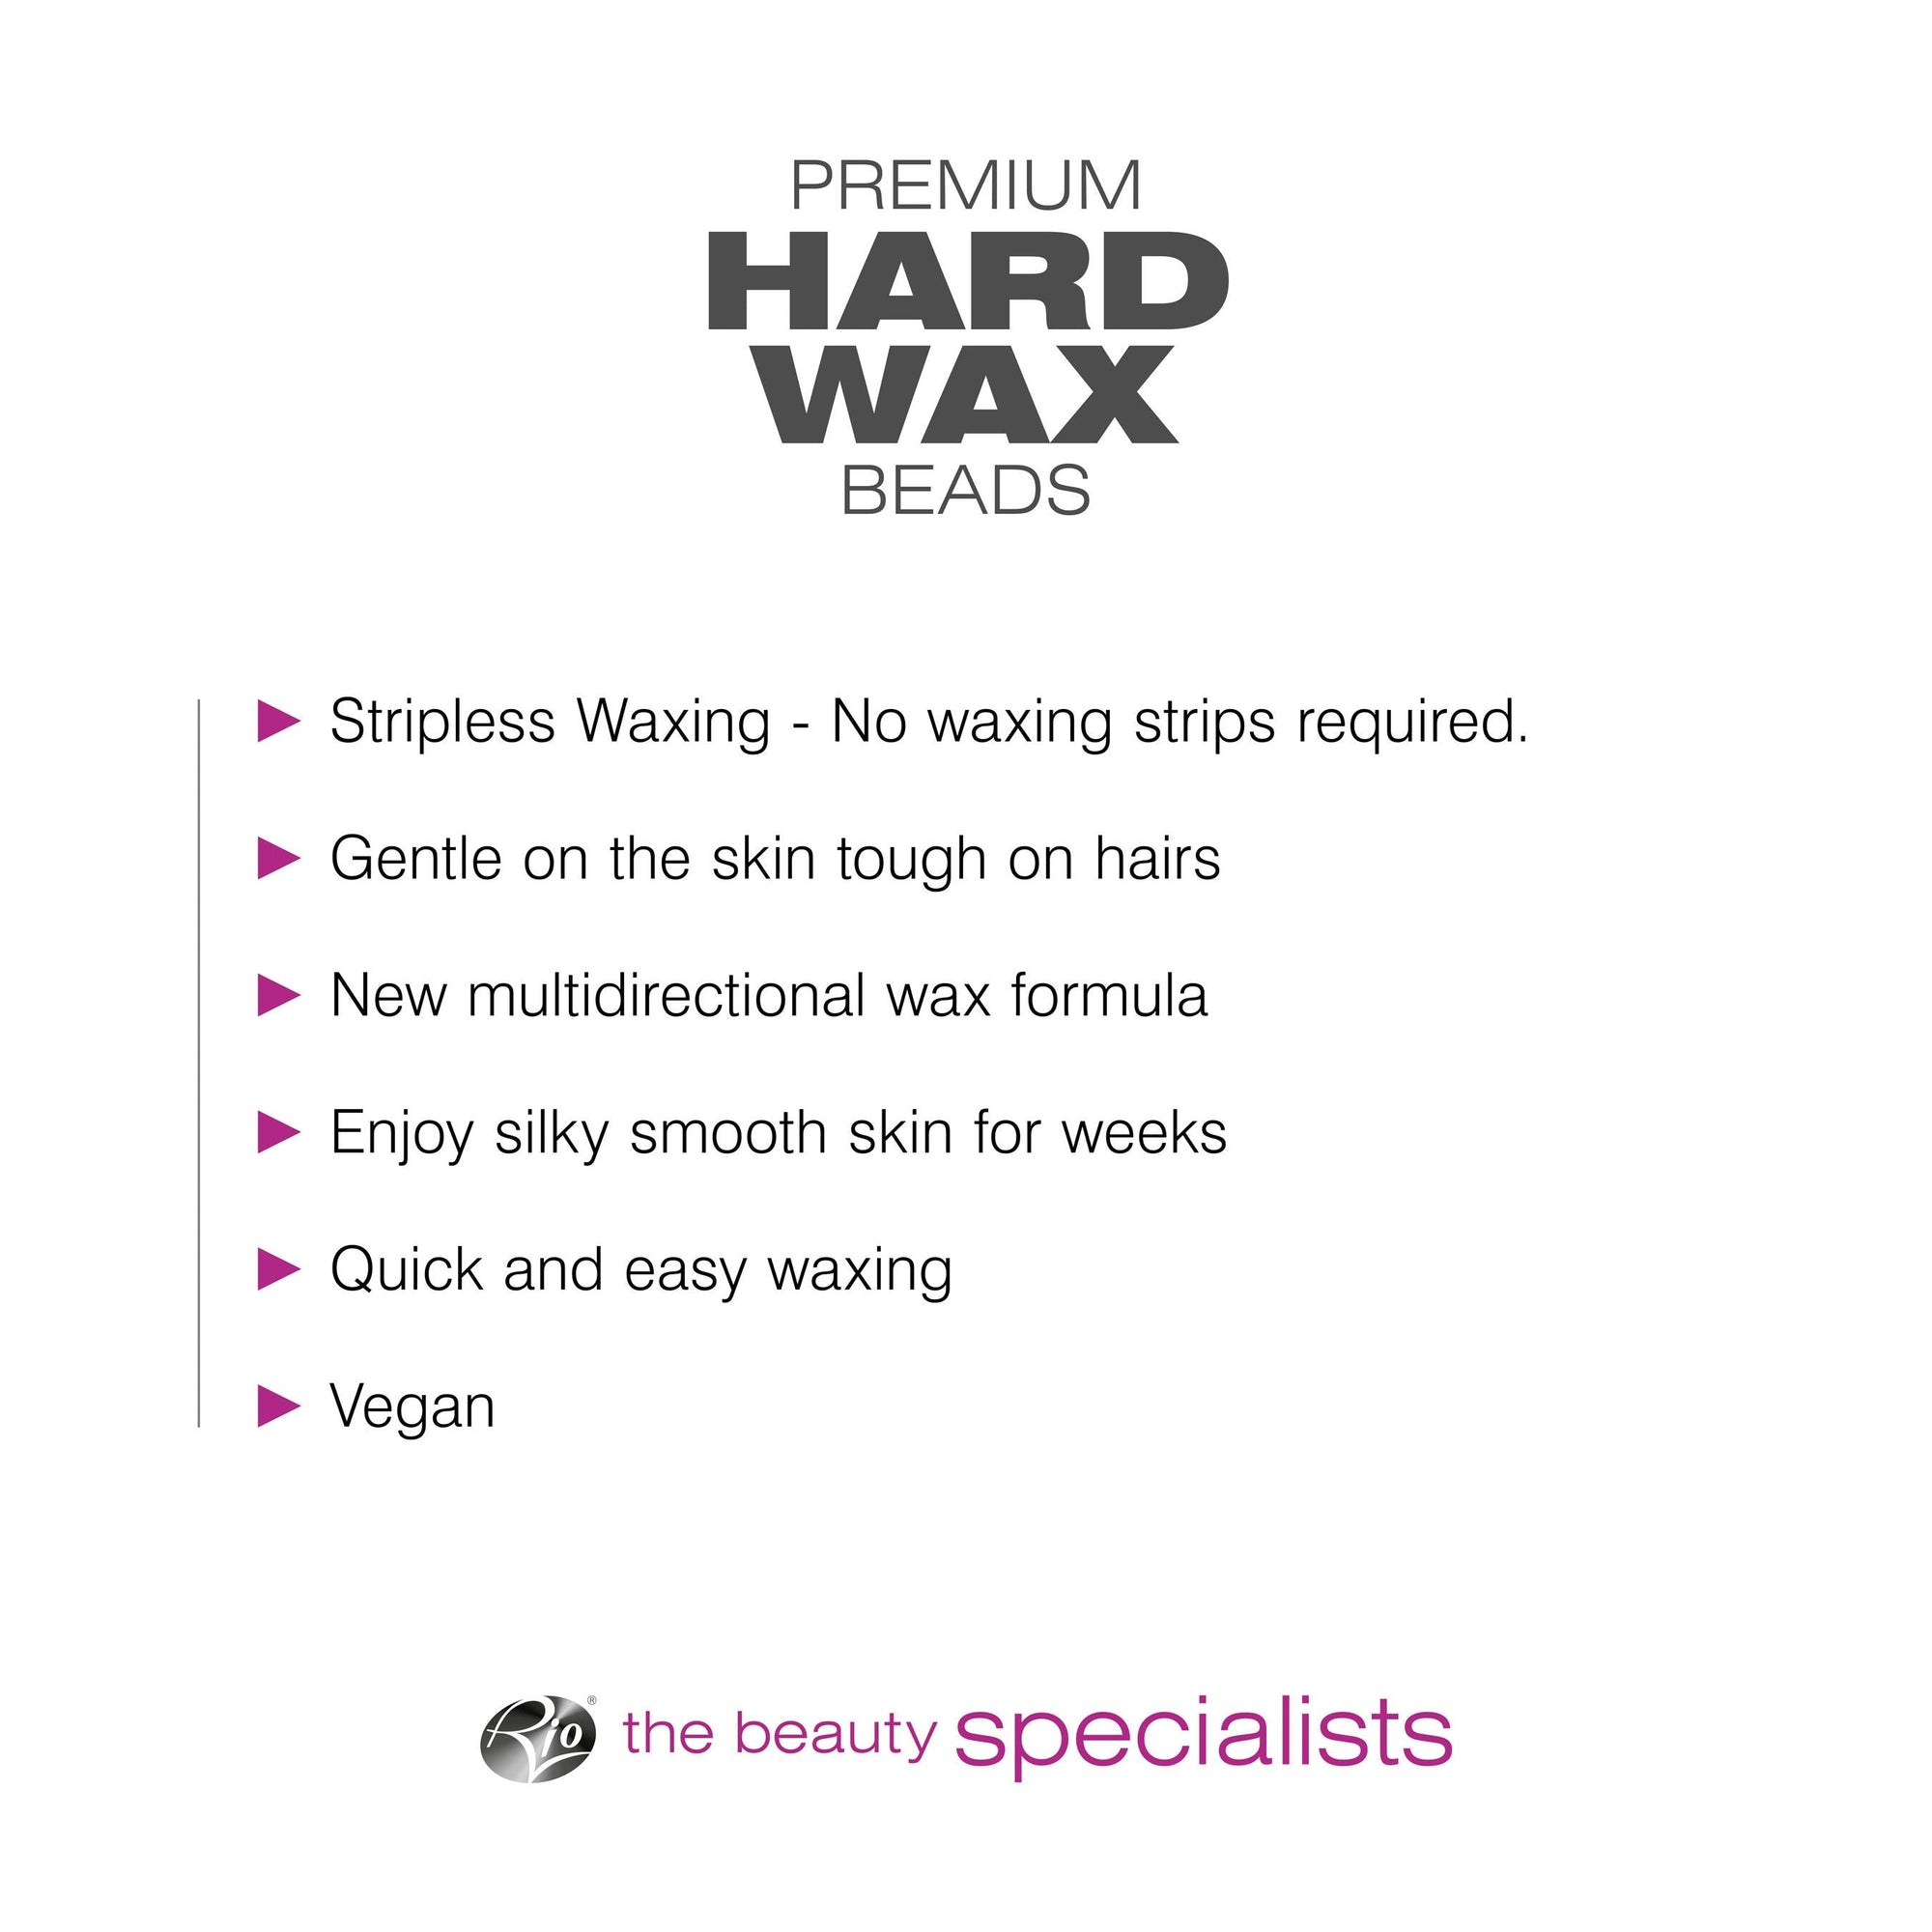 bulleted text listing features of Premium hard wax beads stripless waxing gentle on the skin tough on hairs new multidirectional wax formula enjoy silky smooth skin for weeks quick and easy waxing vegan 